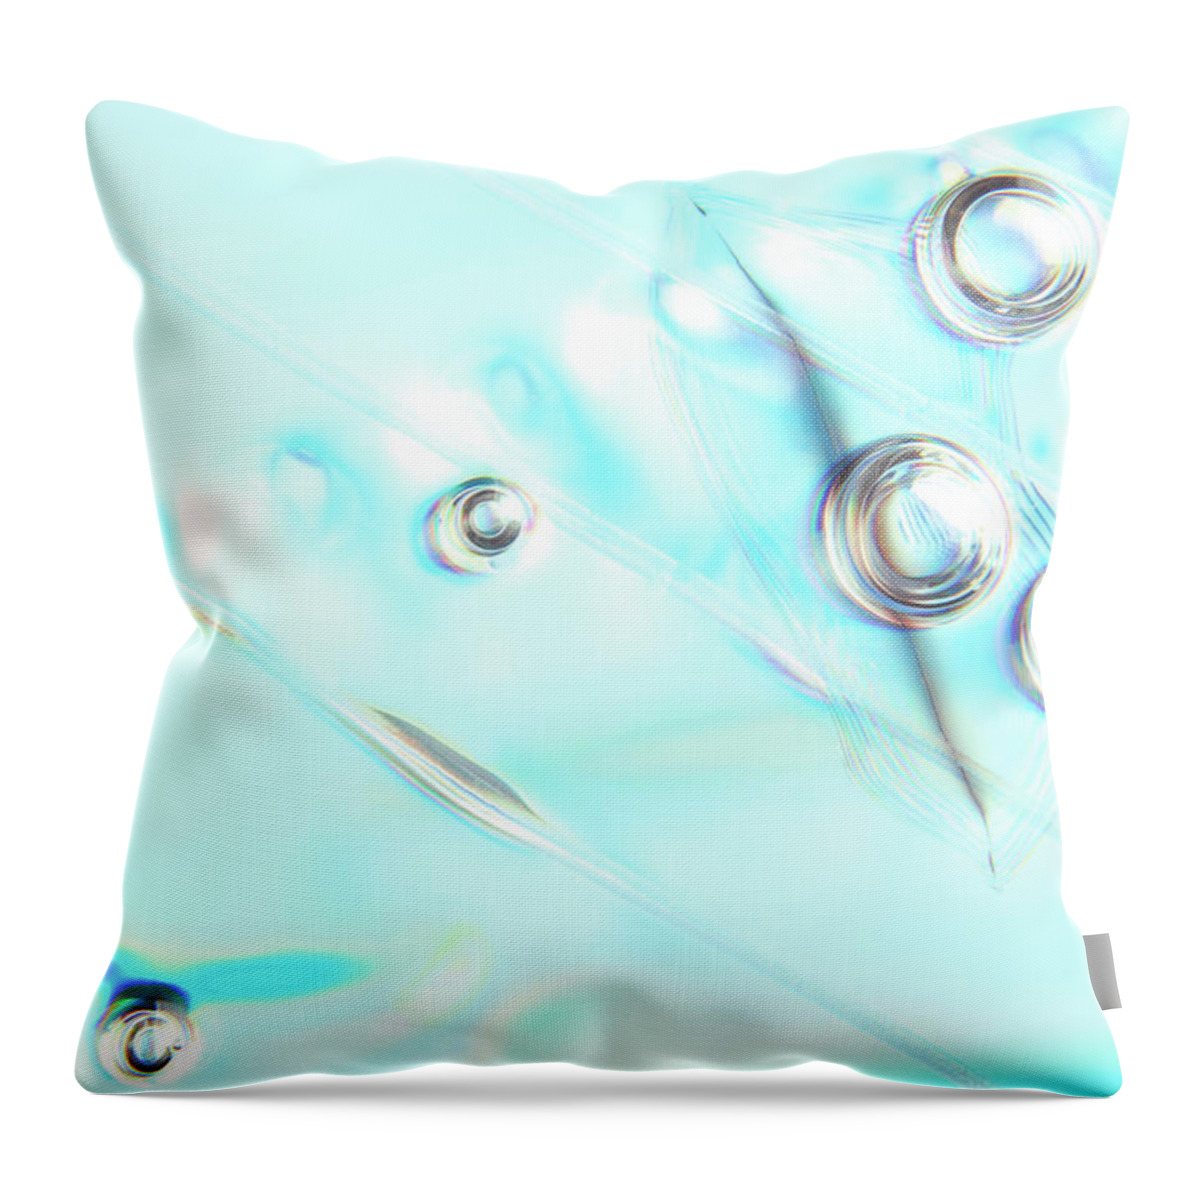 Blue Throw Pillow featuring the photograph Abstract Background In Blue Color by Severija Kirilovaite